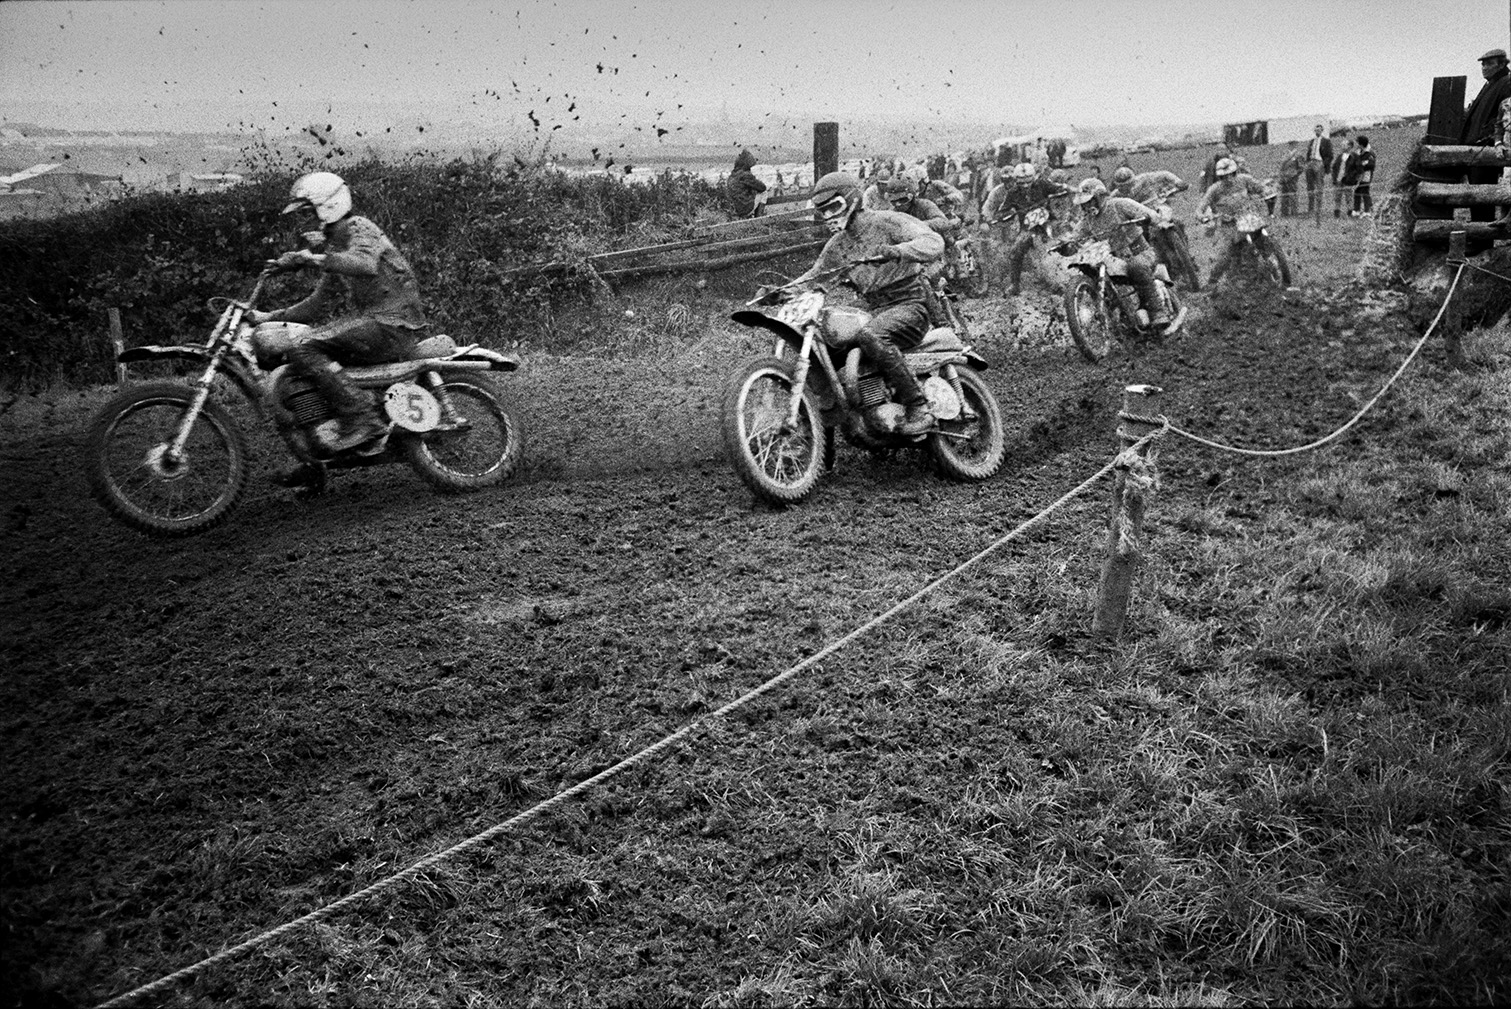 Competitors racing along a muddy course at Torrington motorbike scramble. Mud is flying up from the motorbike wheels. Spectators are watching in the background.